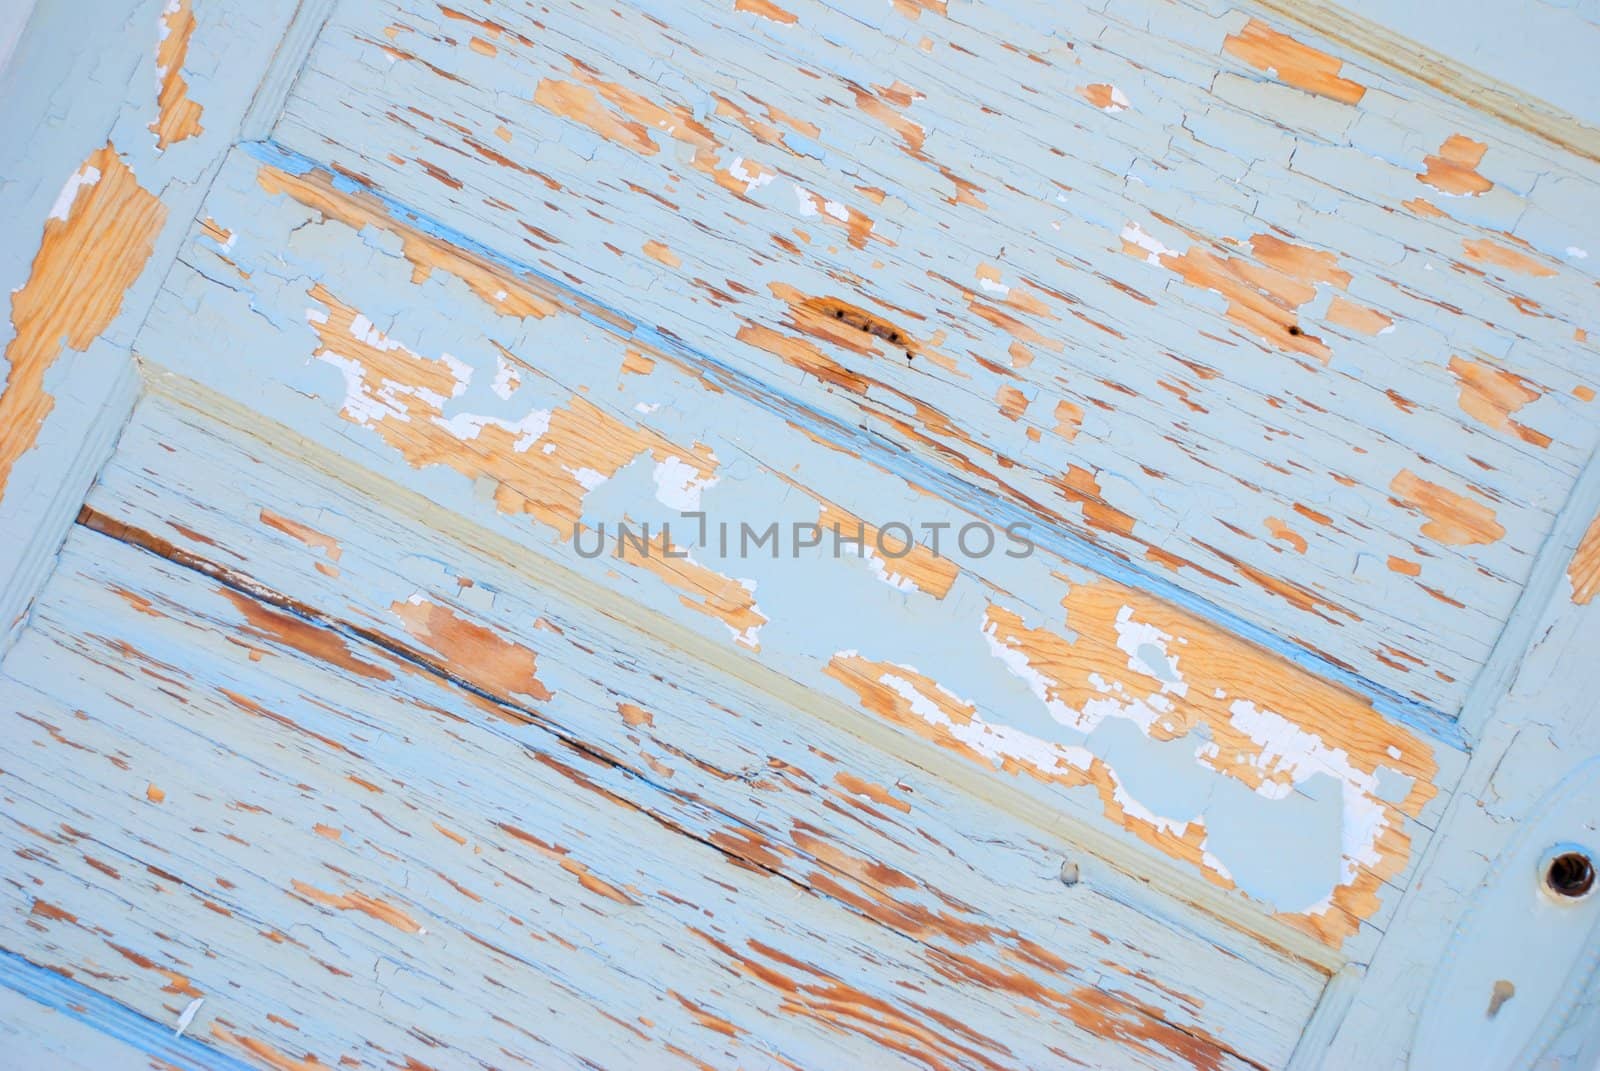 Weathered and Cracked Paint on Wooden Door by pixelsnap